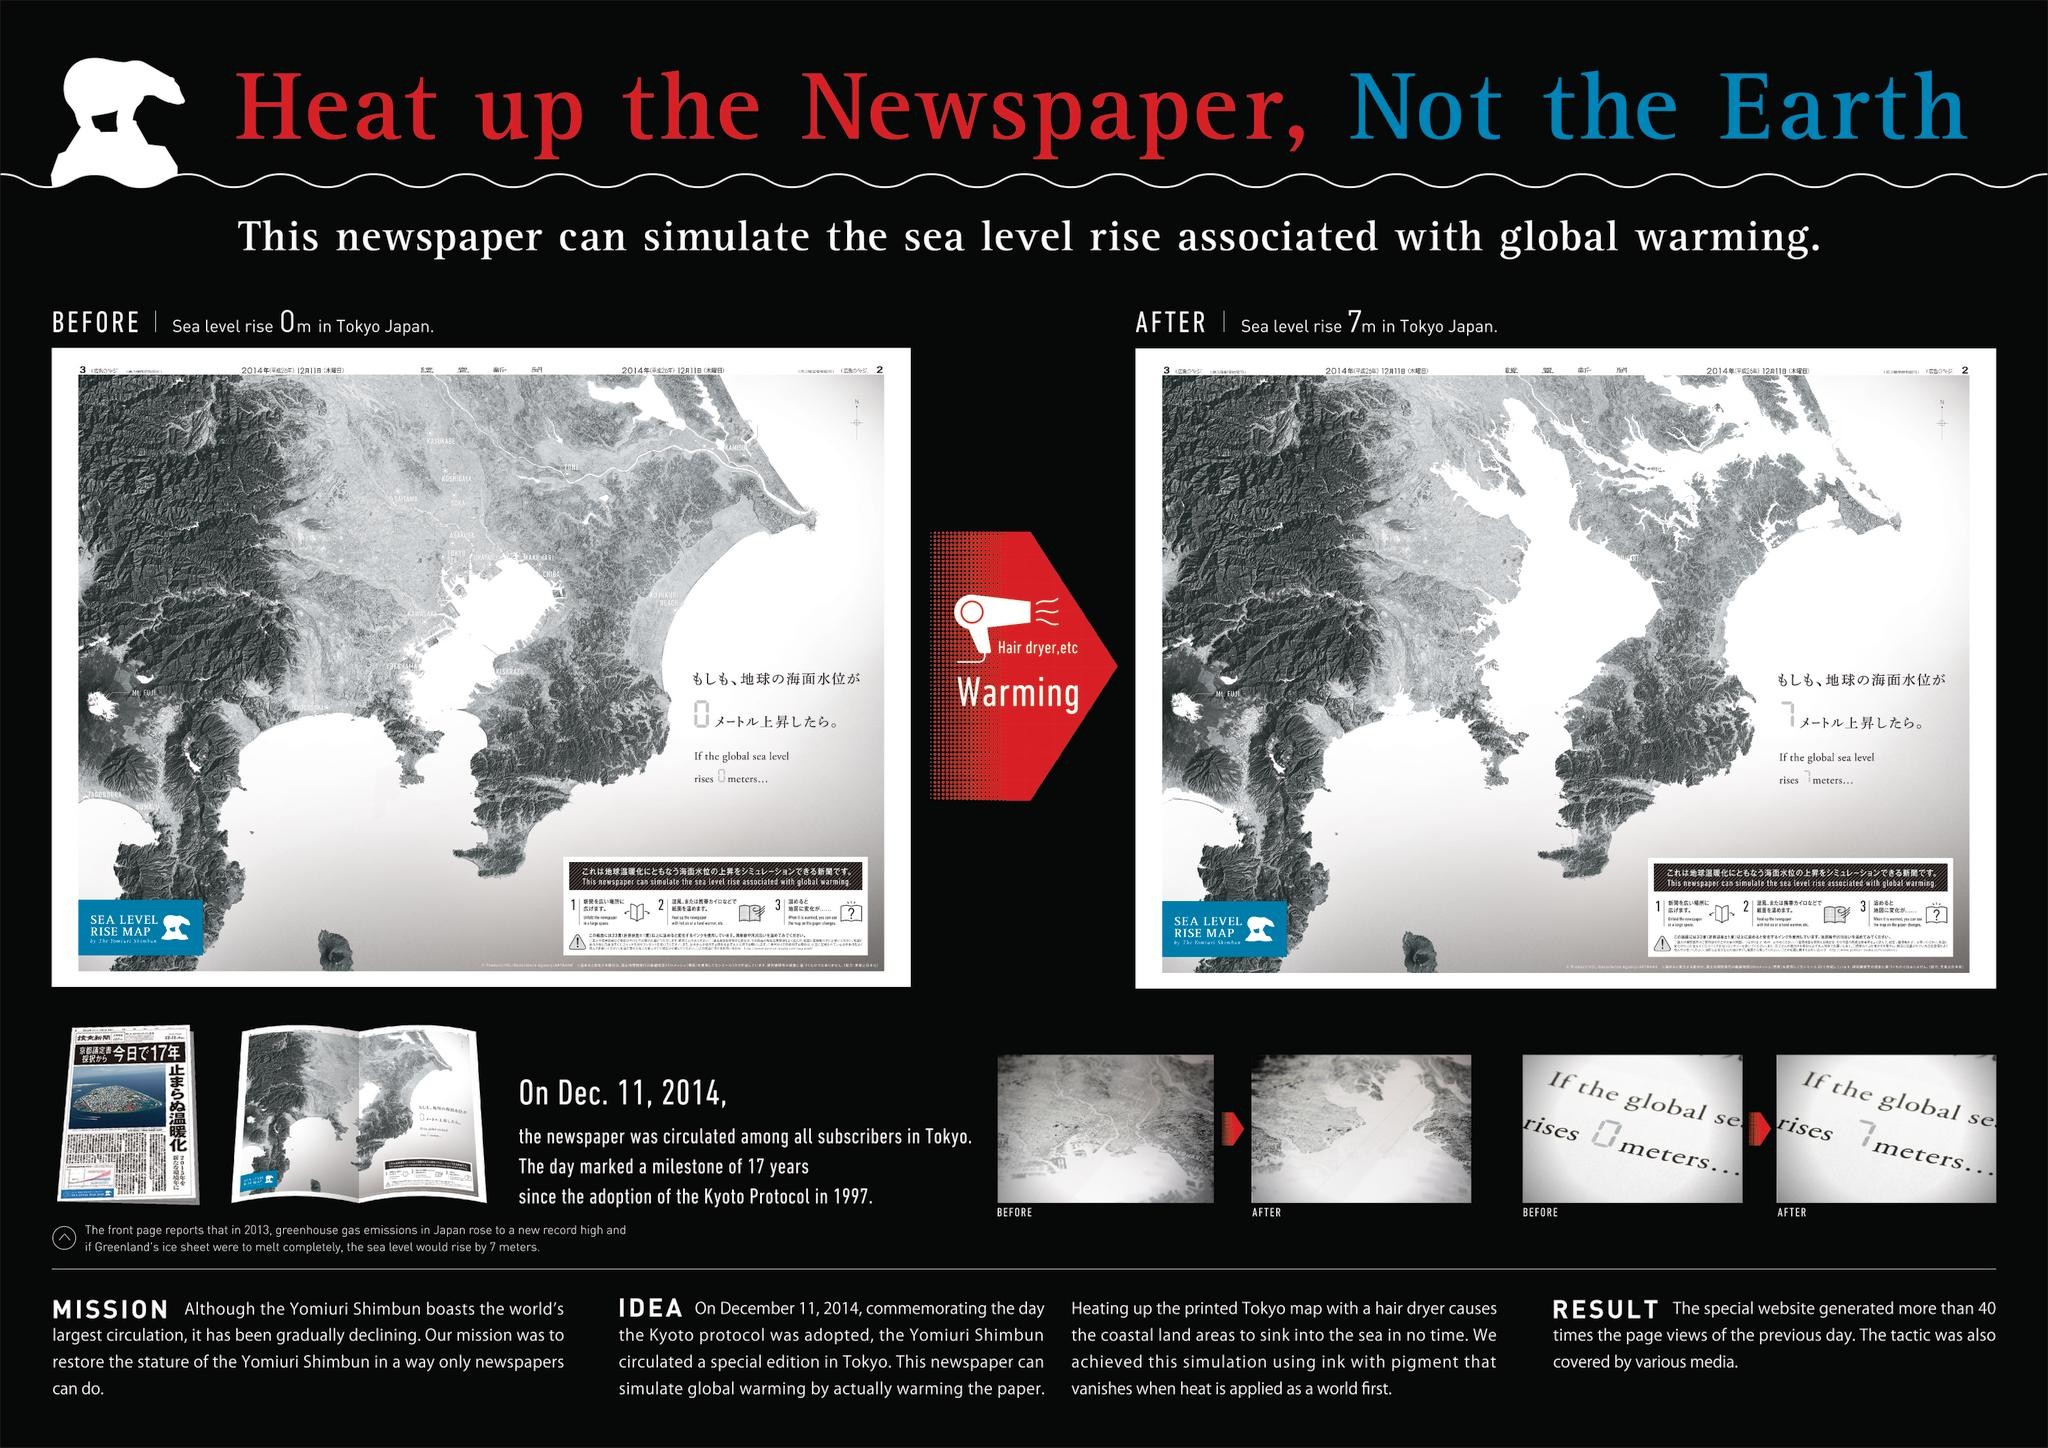 HEAT UP THE NEWSPAPER, NOT THE EARTH